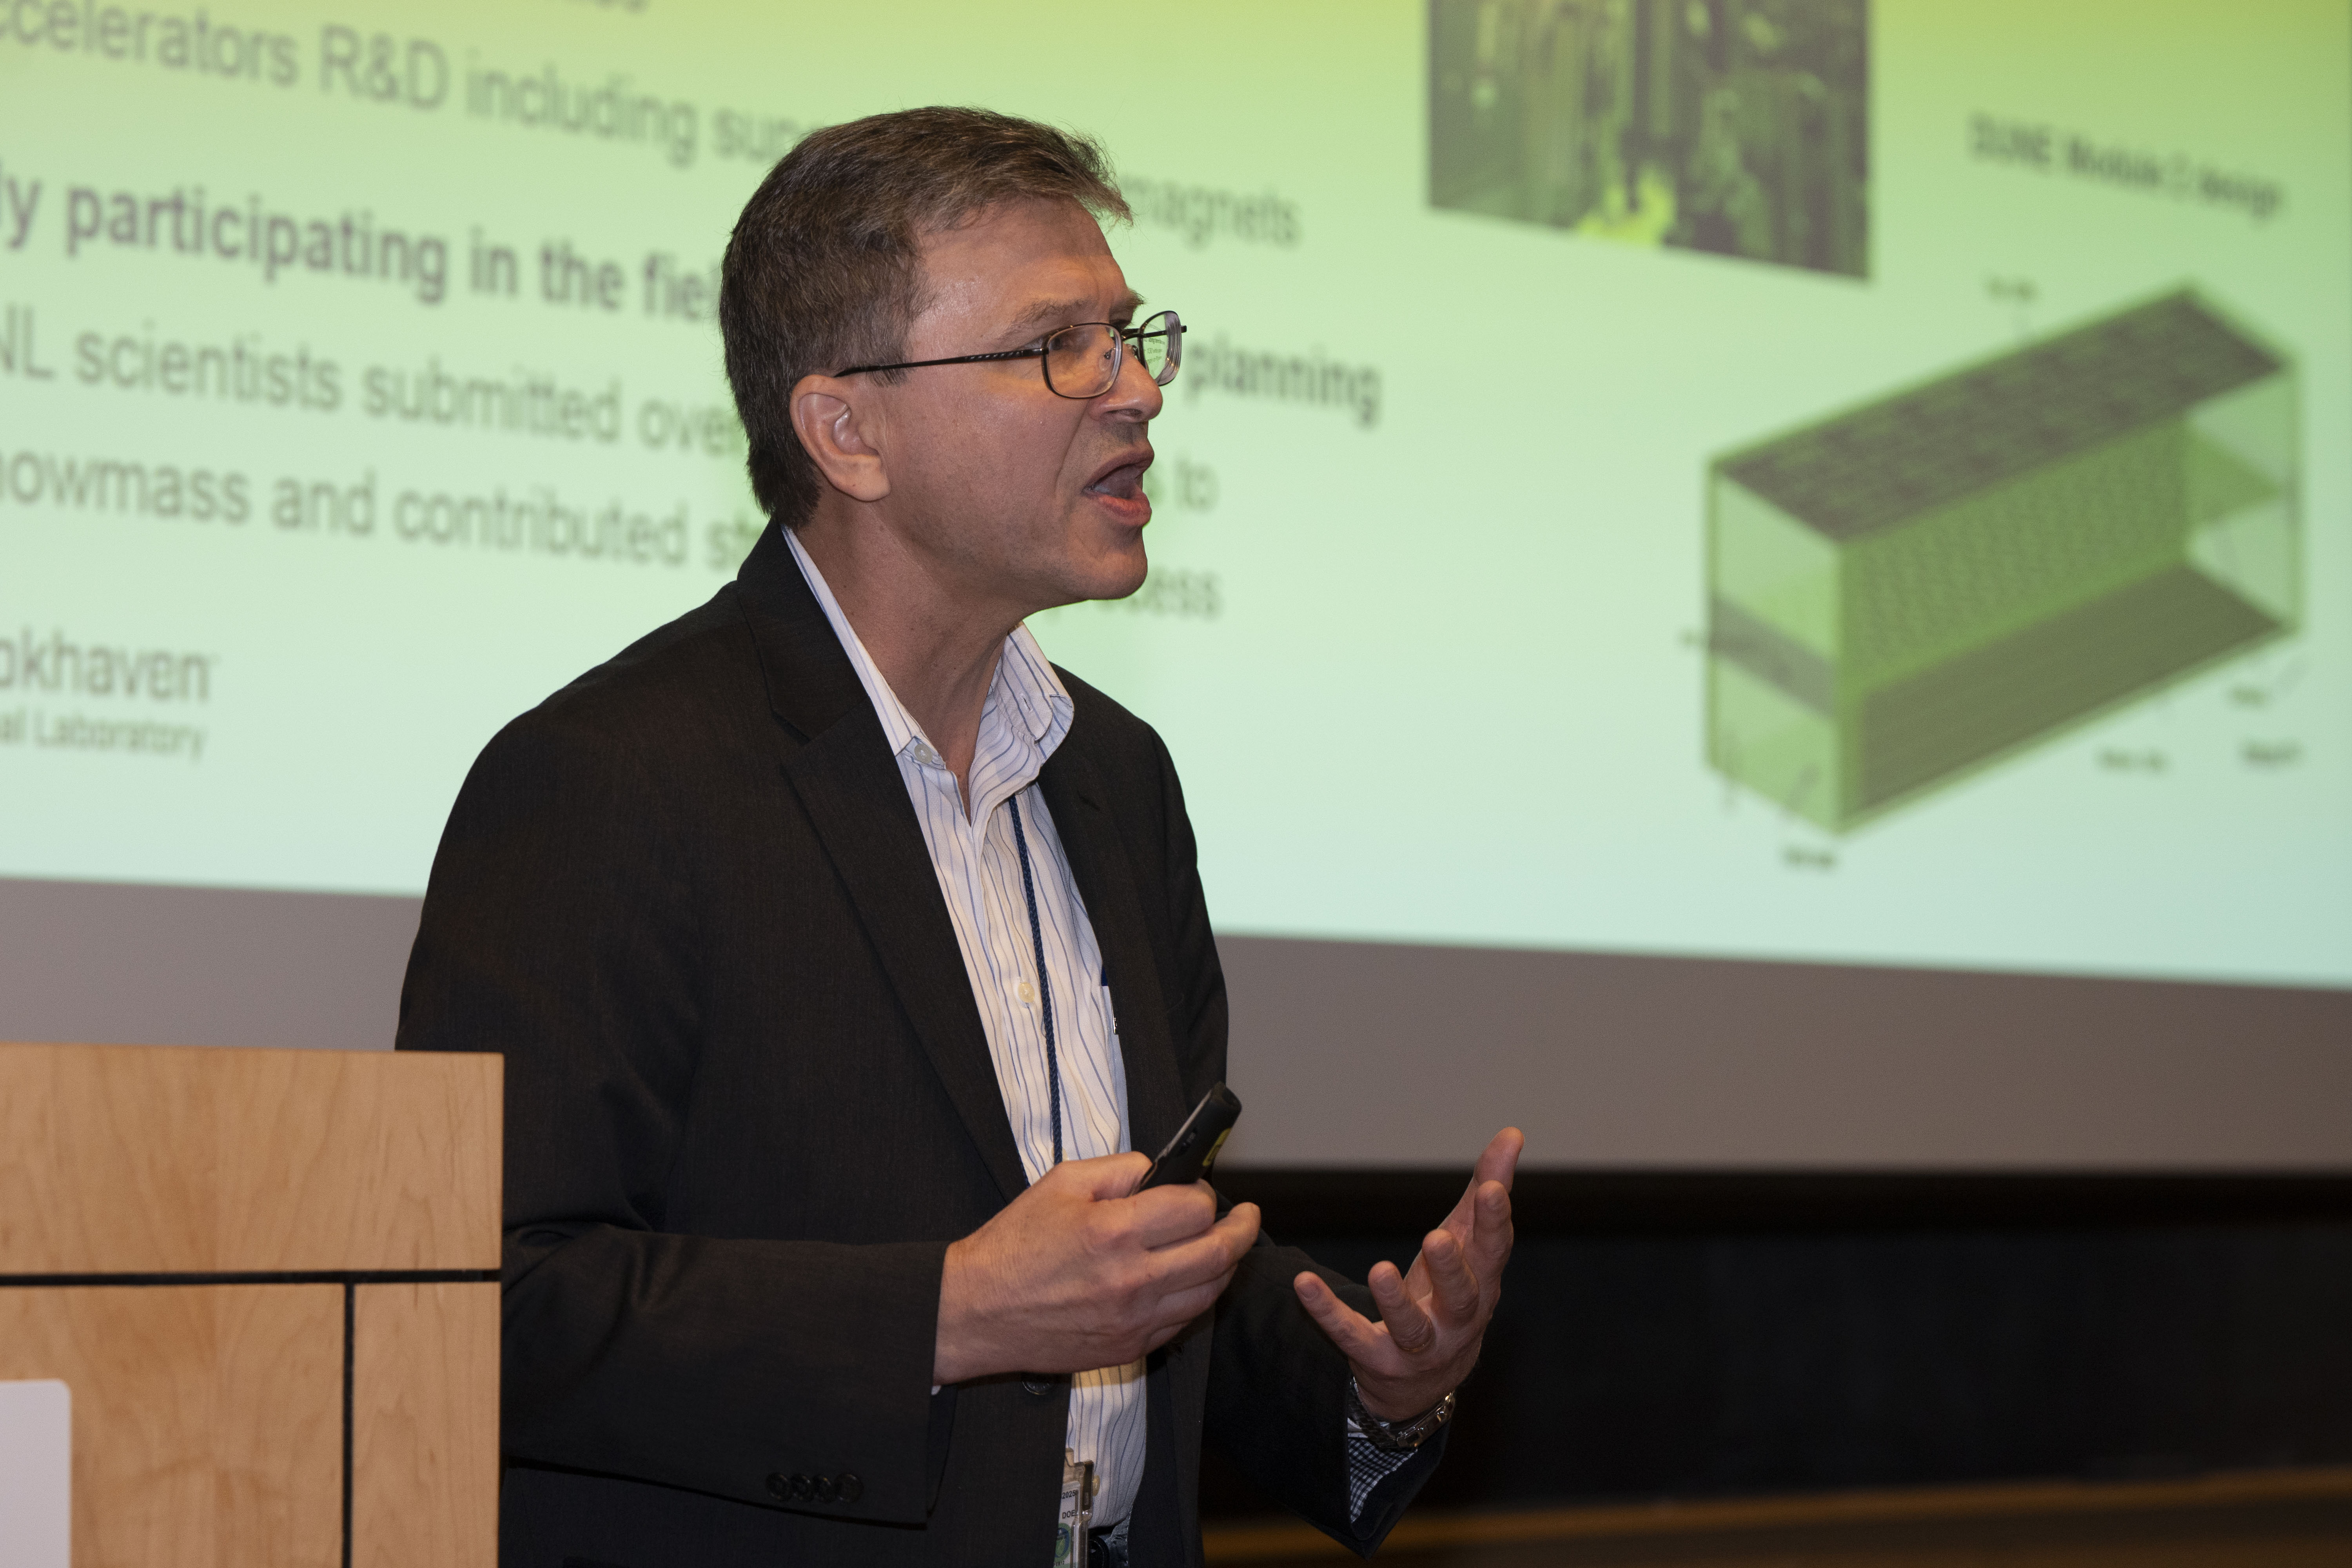 Deputy Associate Laboratory Director for High Energy Physics Dmitri Denisov highlighted the ways Brookhaven Lab is involved in addressing P5 drivers.